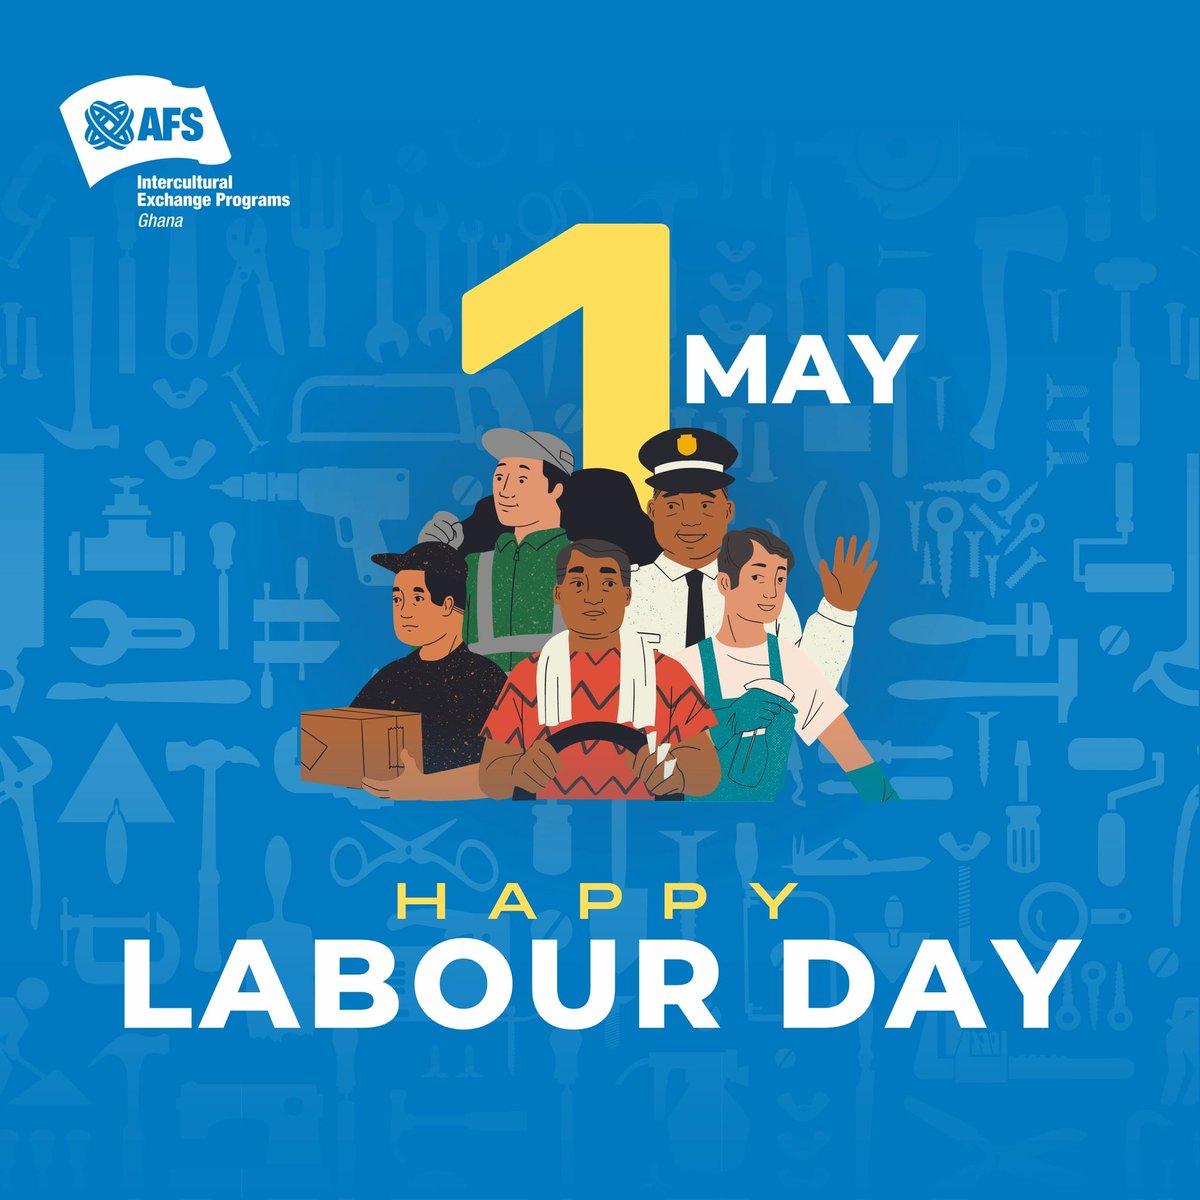 Happy International Labour Day from AFS Ghana! Today, we celebrate the hard work and dedication of all workers around the world. Let's continue to create opportunities for global understanding and cooperation through our work and experiences
#AFSeffect #LabourDay #AFSGhana #Ghana